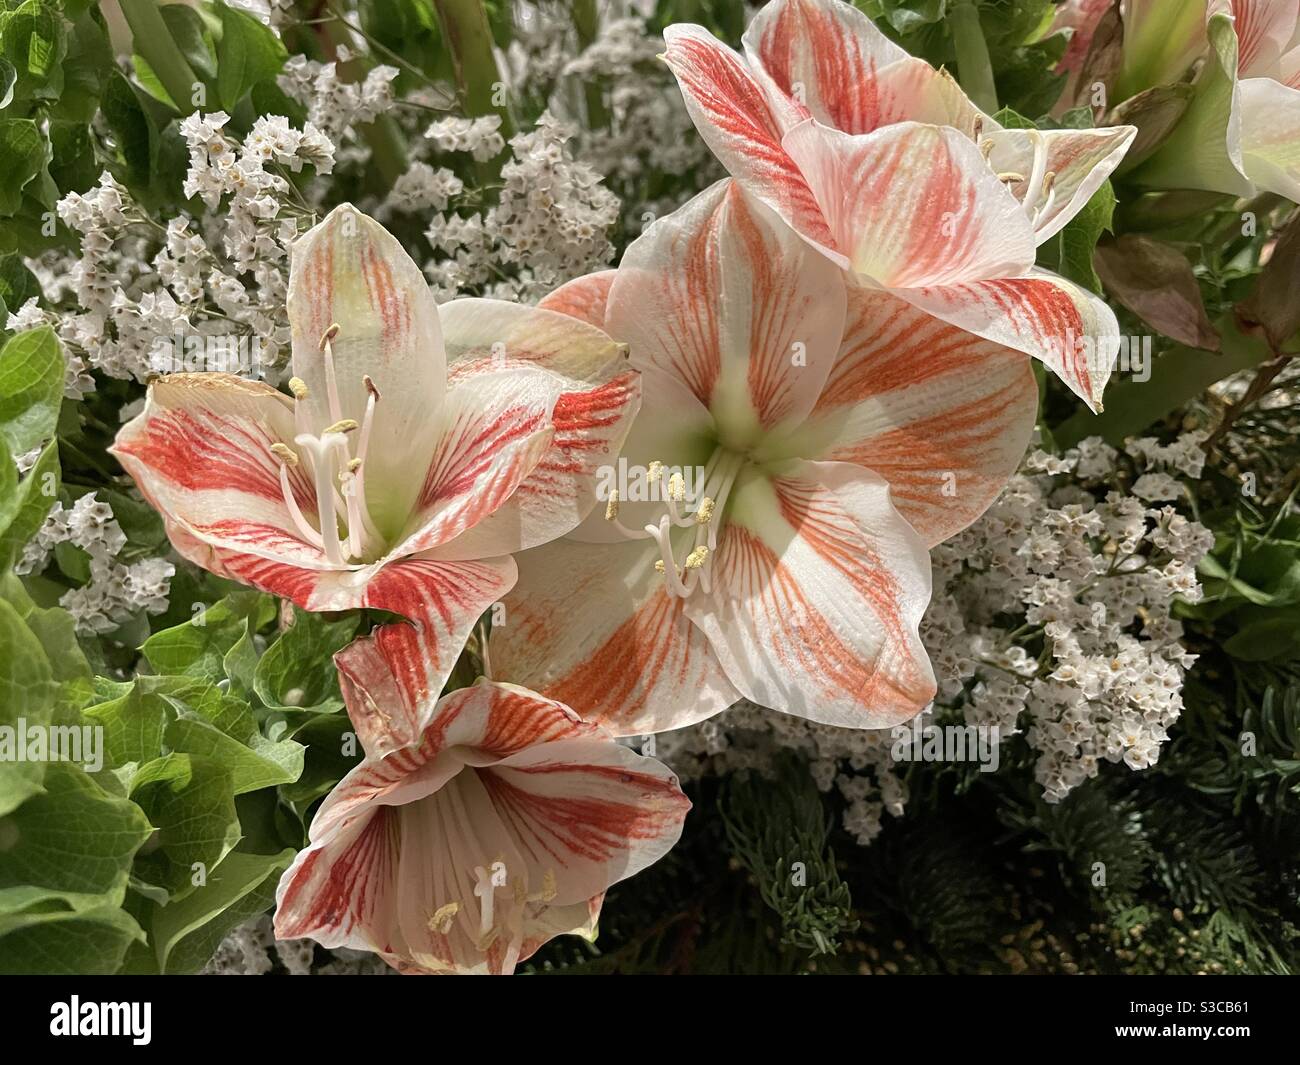 Red and white amaryllis flowers Stock Photo